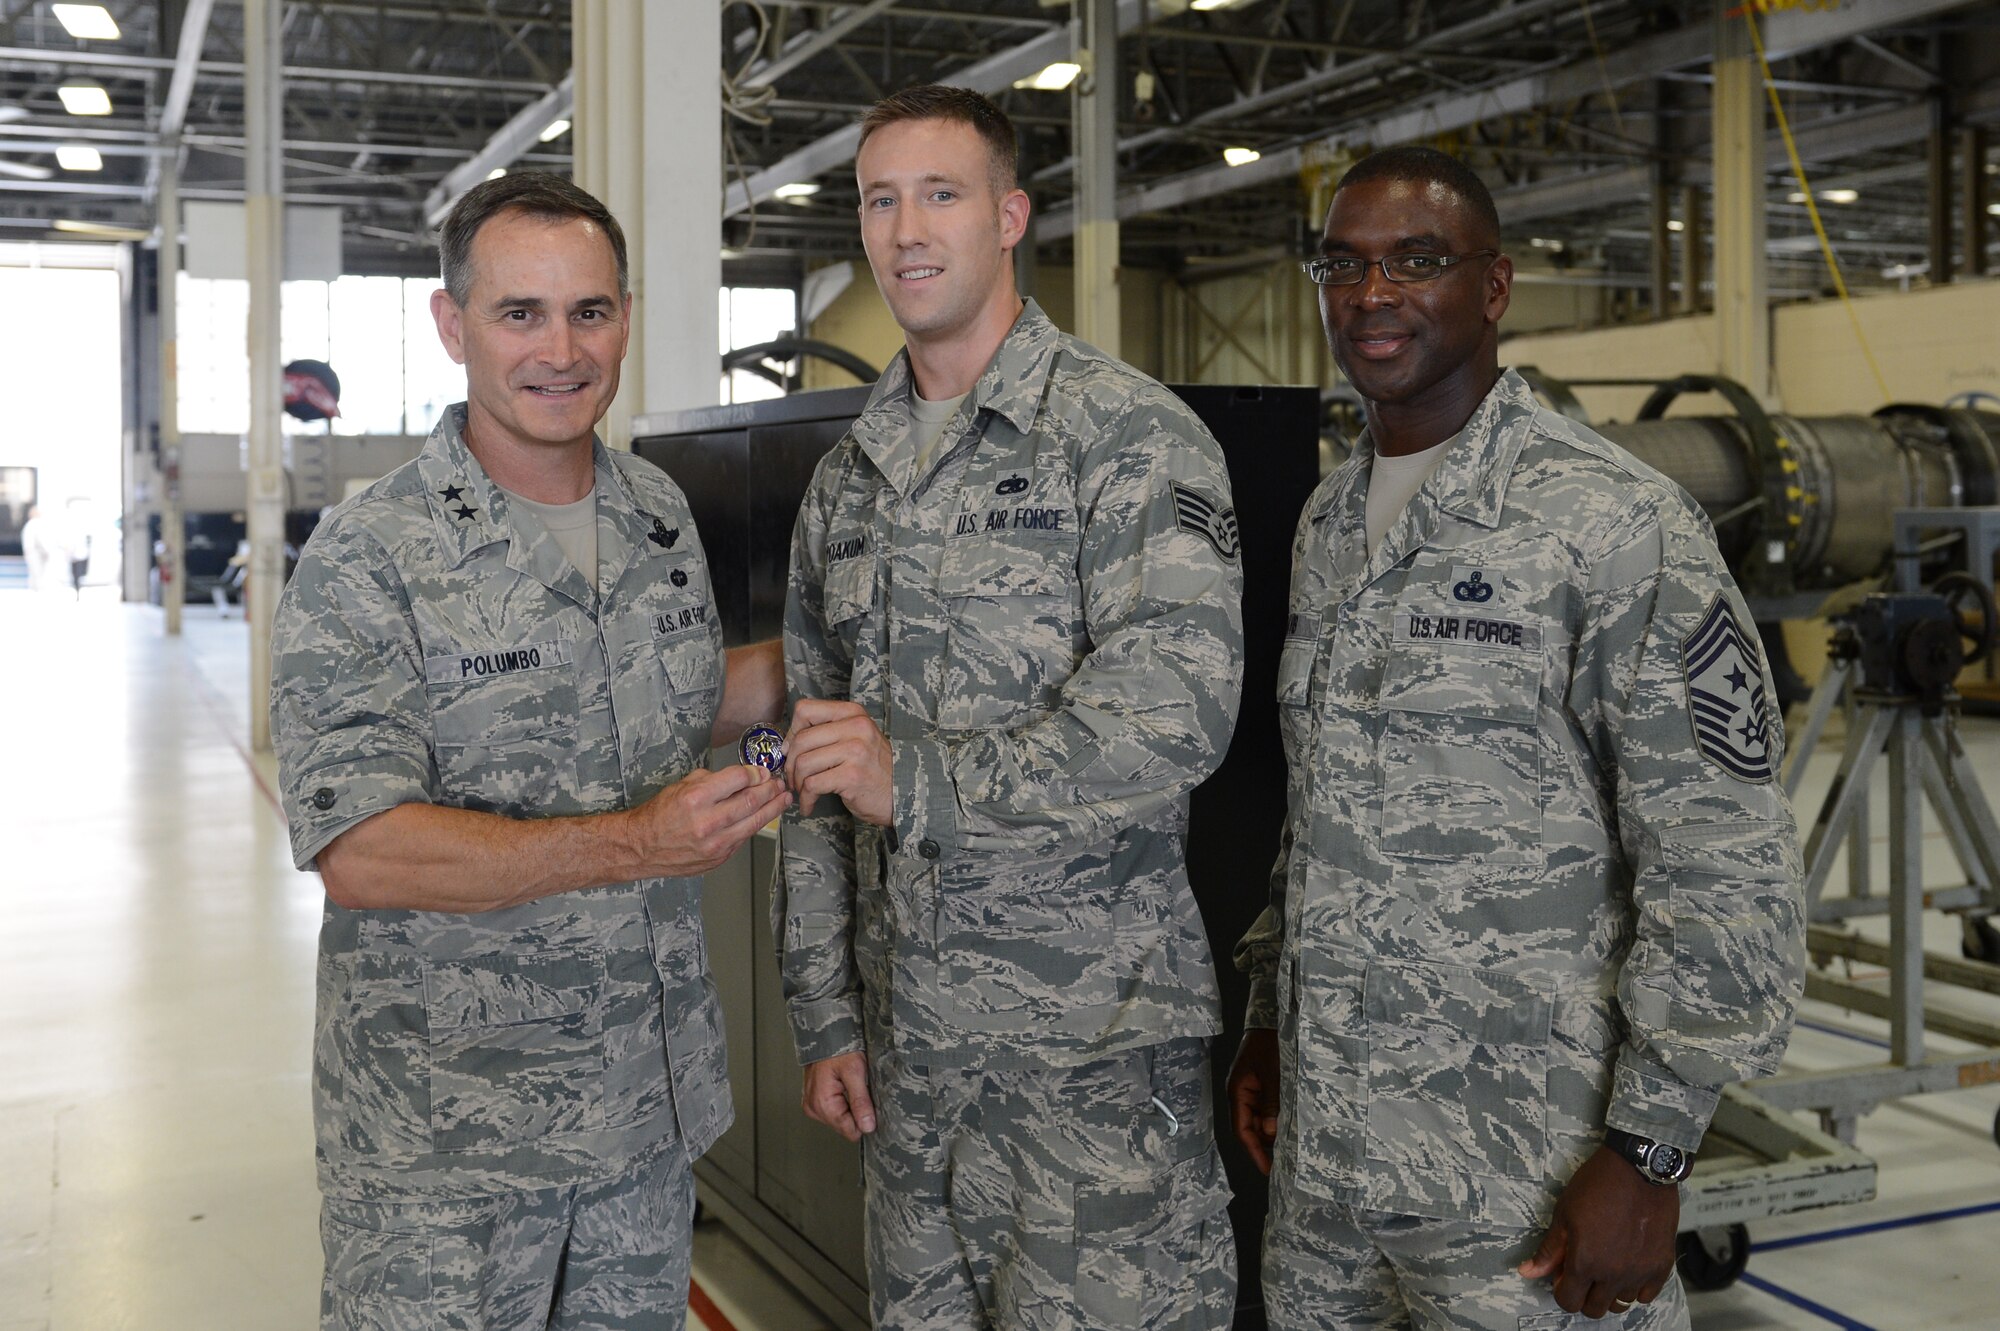 Maj. Gen. Jake Polumbo, 9th Air Force commander, presents Staff Sgt. Derek Yoakum, 20th Component Maintenance Squadron, with his commander’s coin during a tour of 20th Fighter Wing at Shaw Air Force Base, S.C., July 1, 2013. In addition to visiting the 20th CMS, Polumbo also visited other units that compose 20th FW like the 20th Medical Group and the 20th Logistics Readiness Squadron. (U.S. Air Force photo by Airman 1st Class Krystal M. Jeffers/Released)